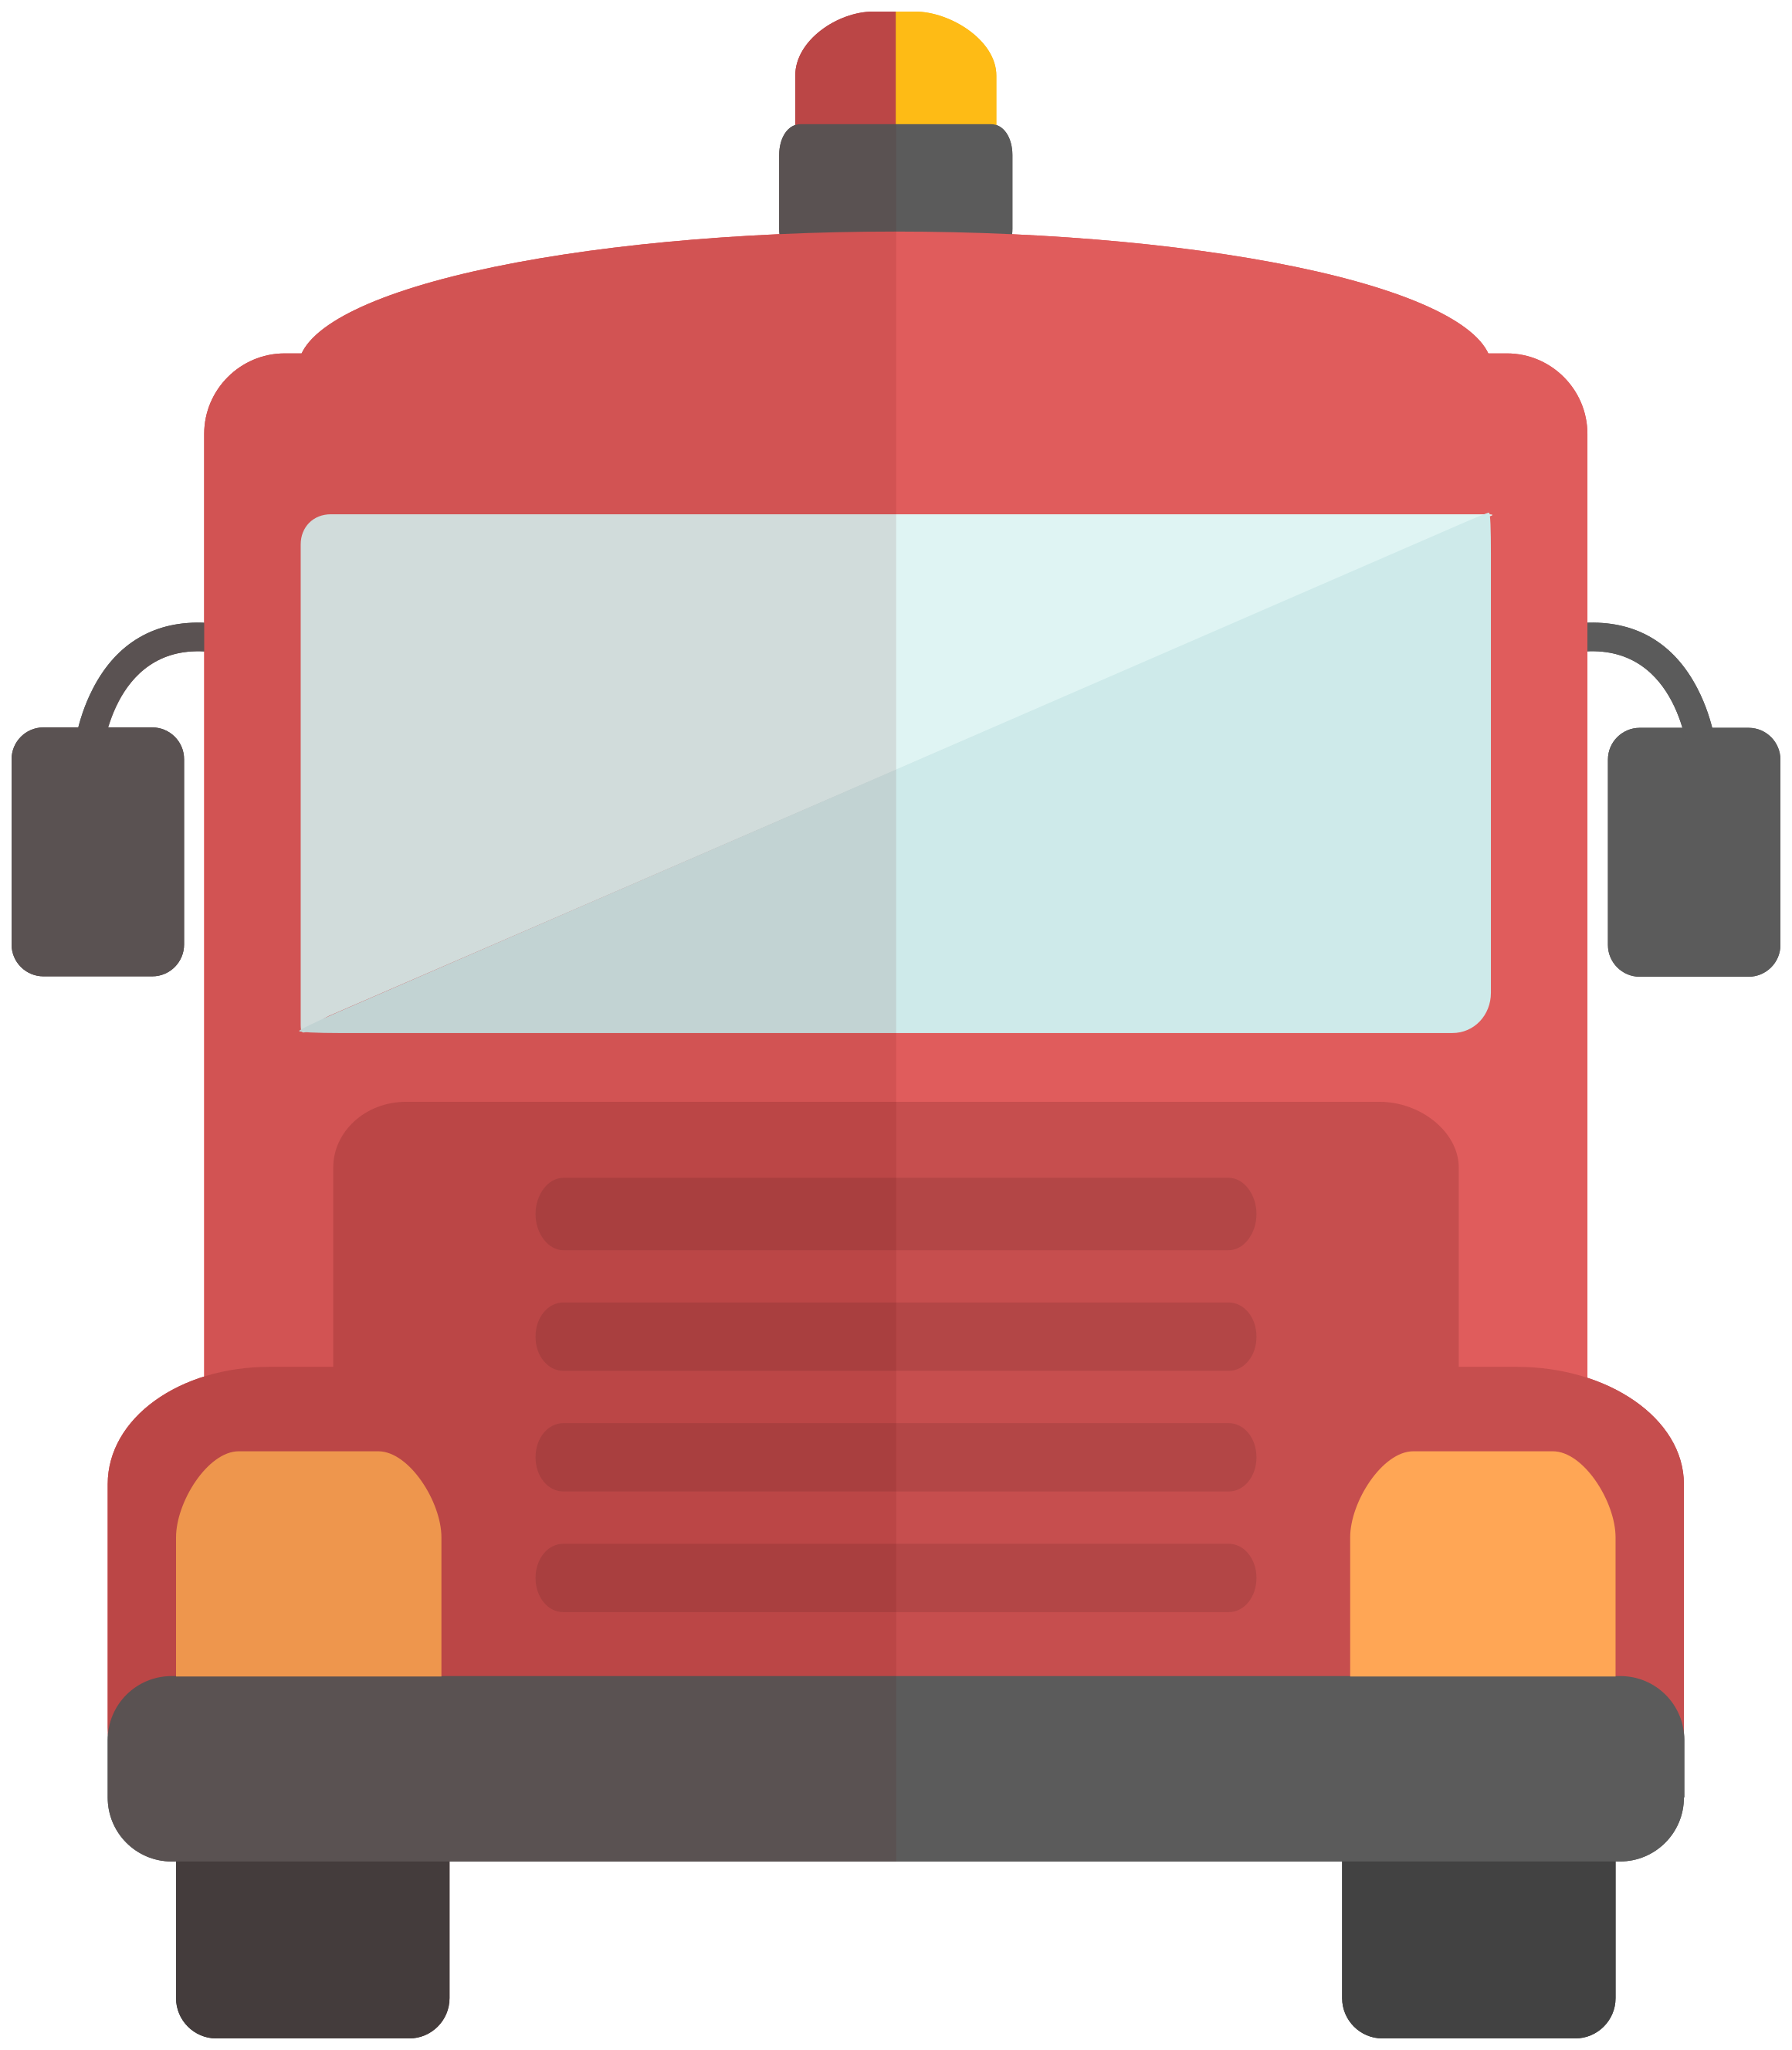 Fire Truck PNG Images Transparent Background | PNG Play